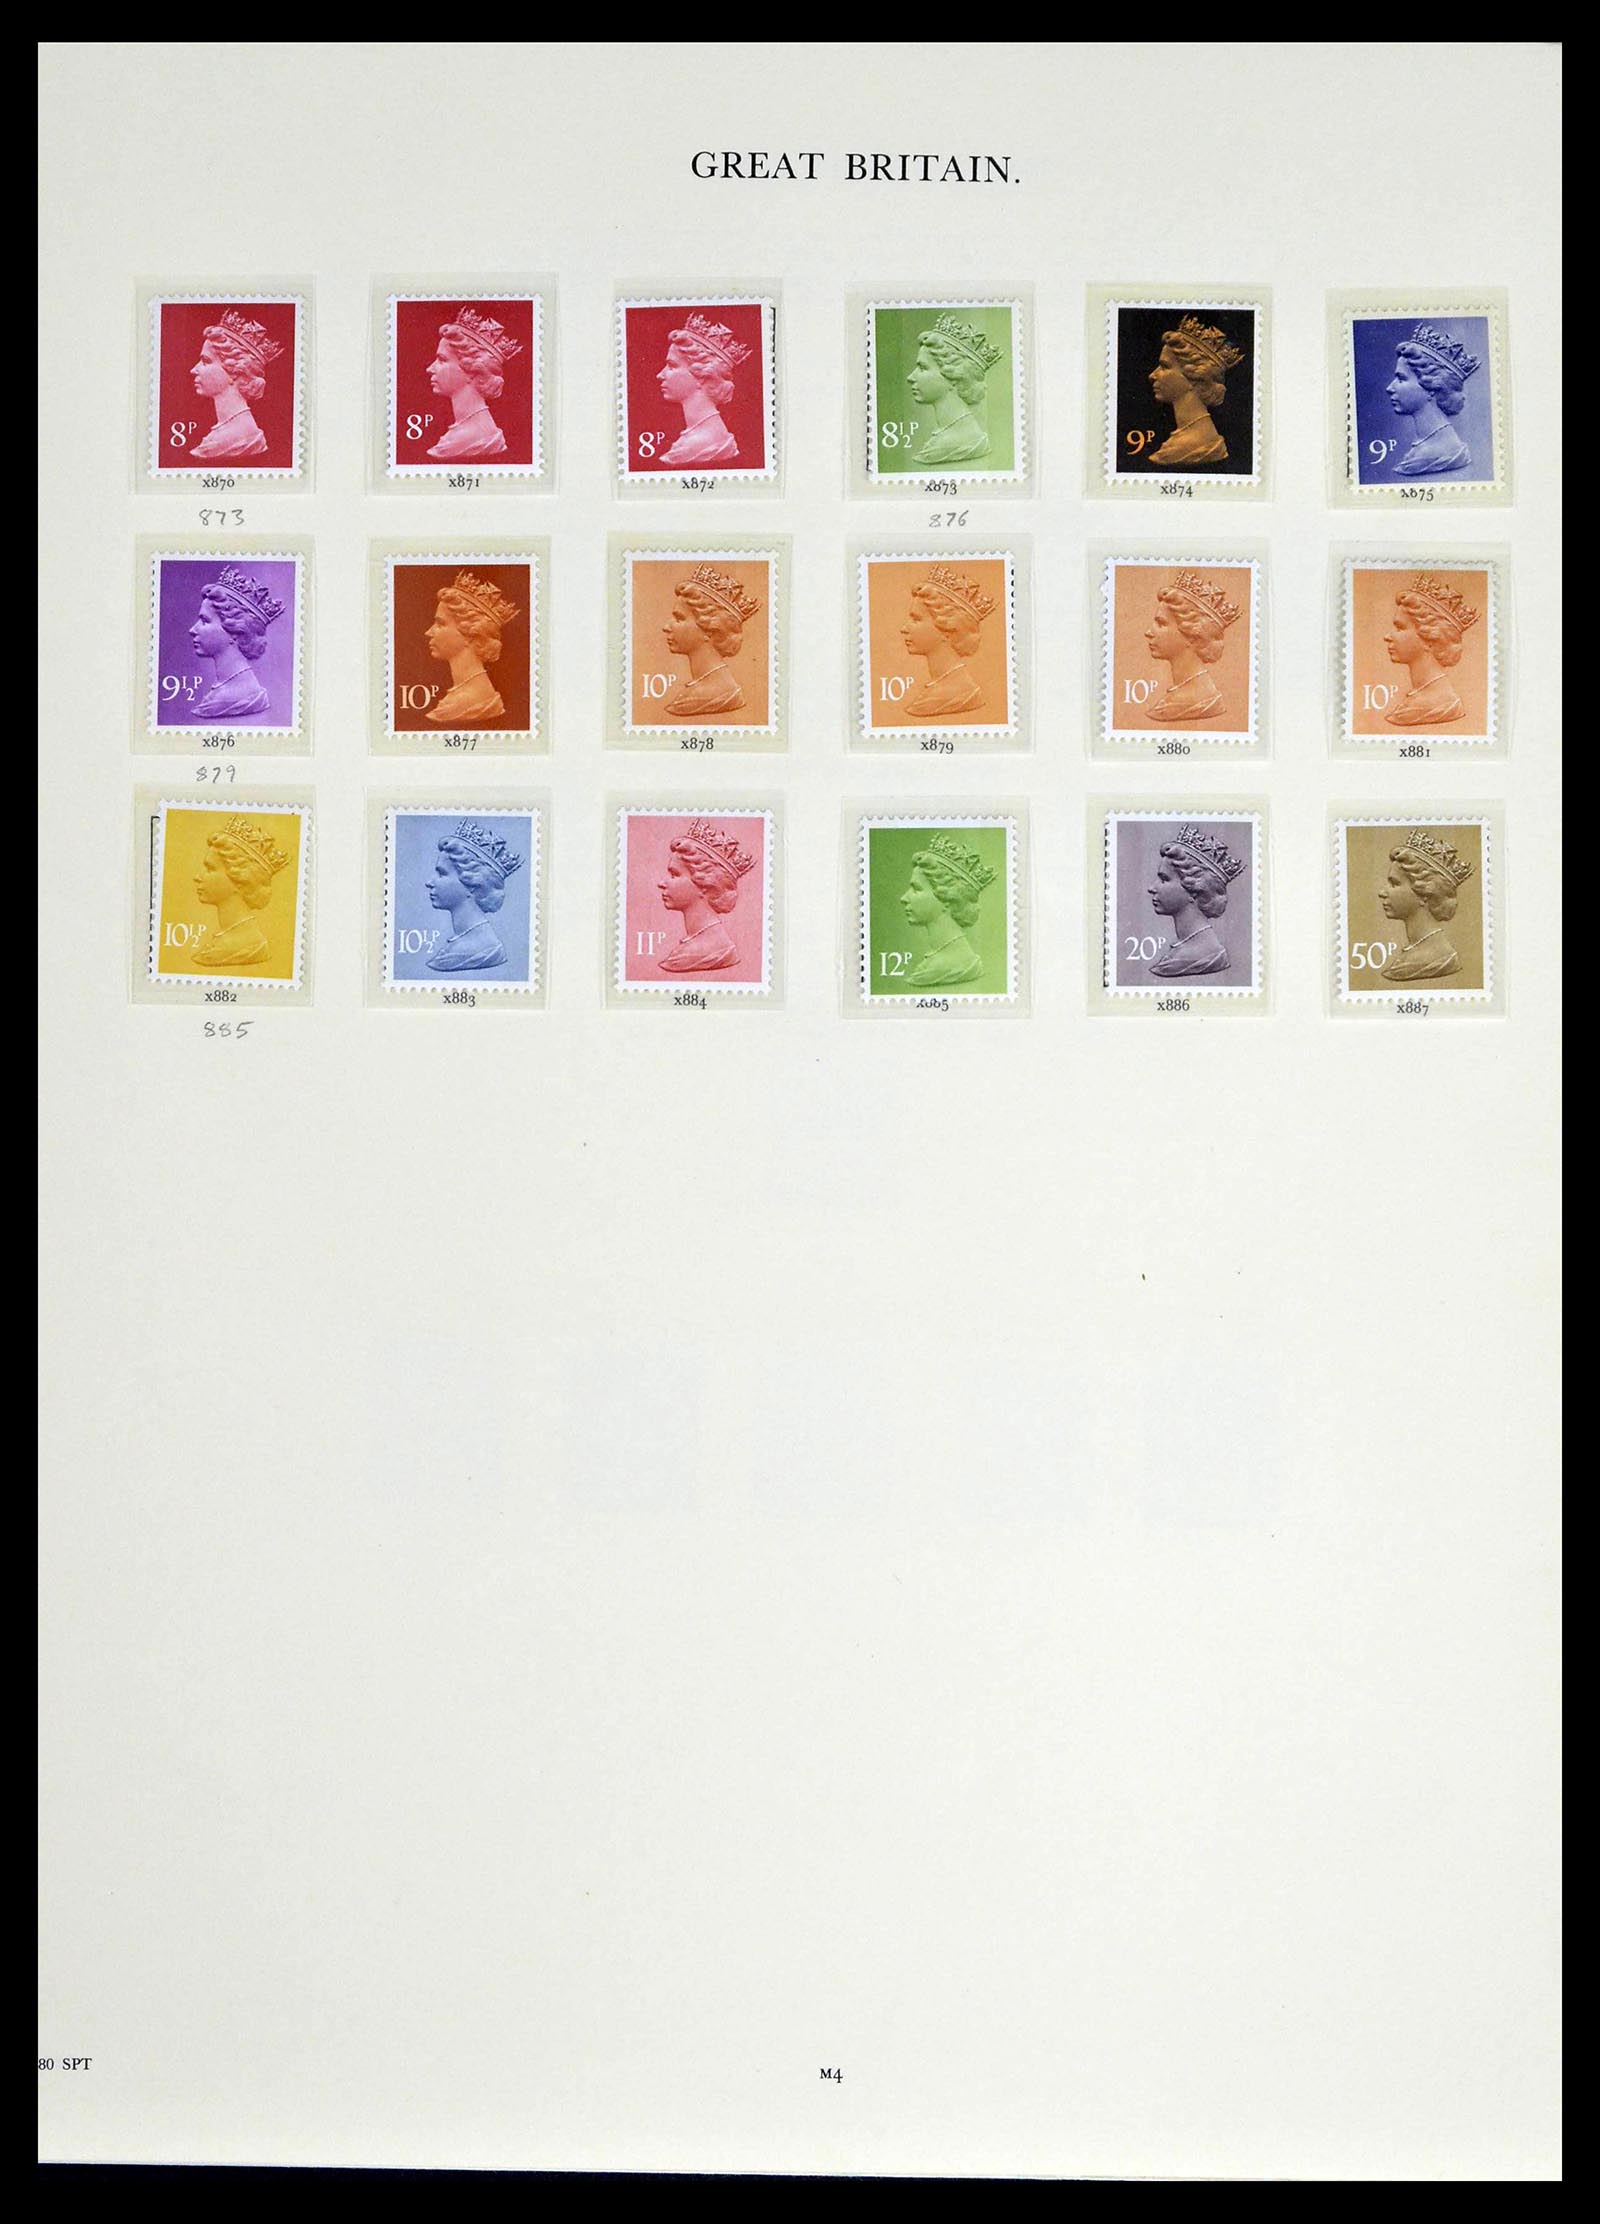 39025 0127 - Stamp collection 39025 Great Britain specialised 1840-1990.